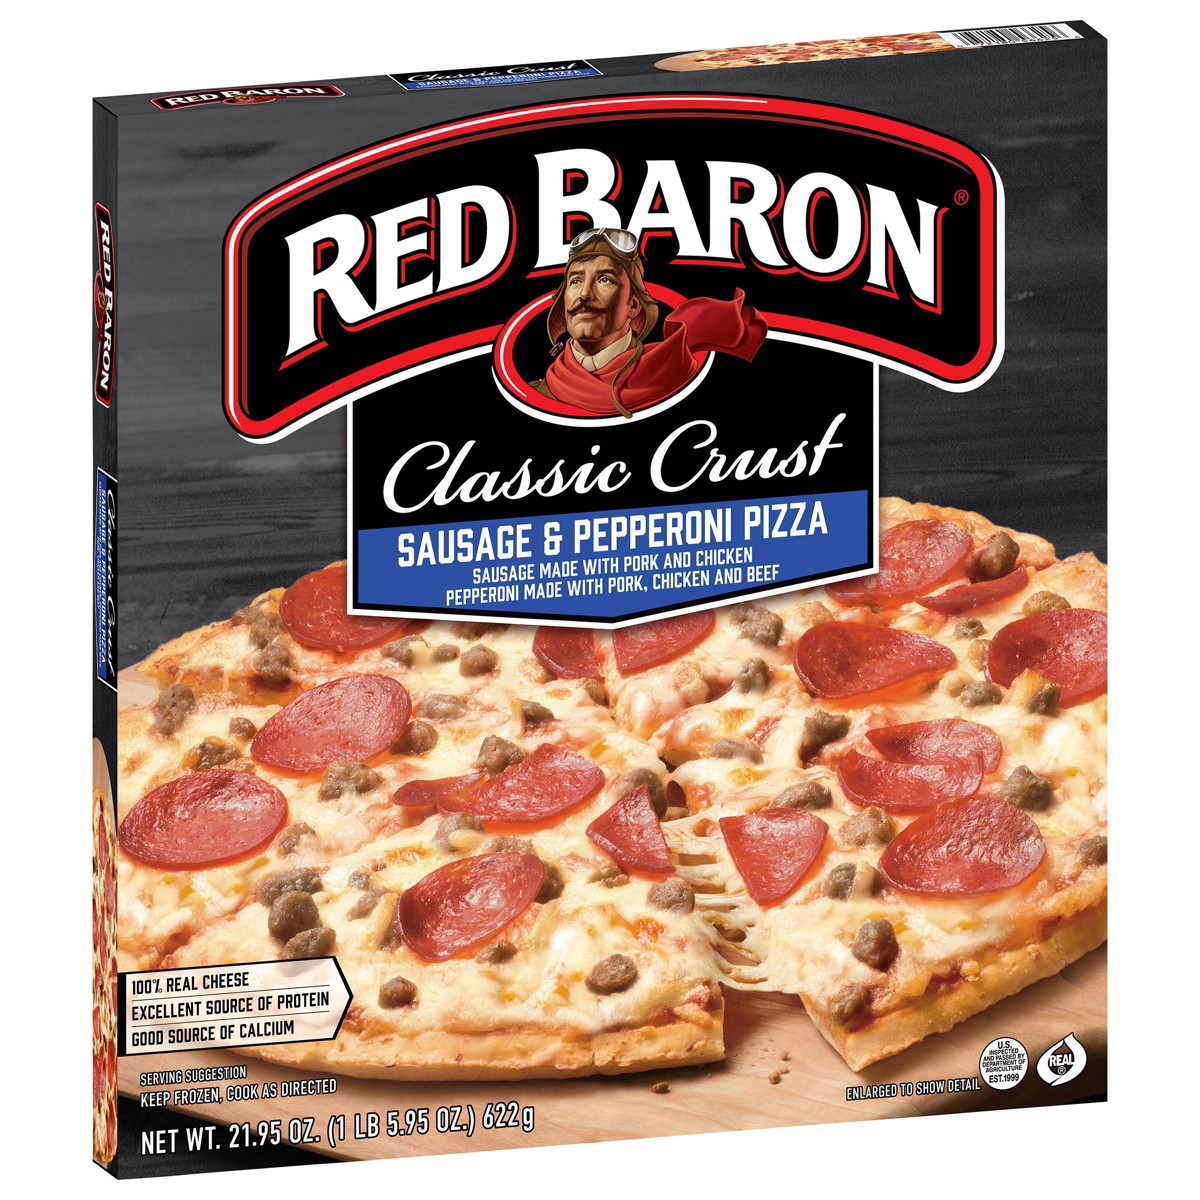 slide 21 of 49, Red Baron Frozen Pizza Classic Crust Sausage & Pepperoni, 21.95 oz